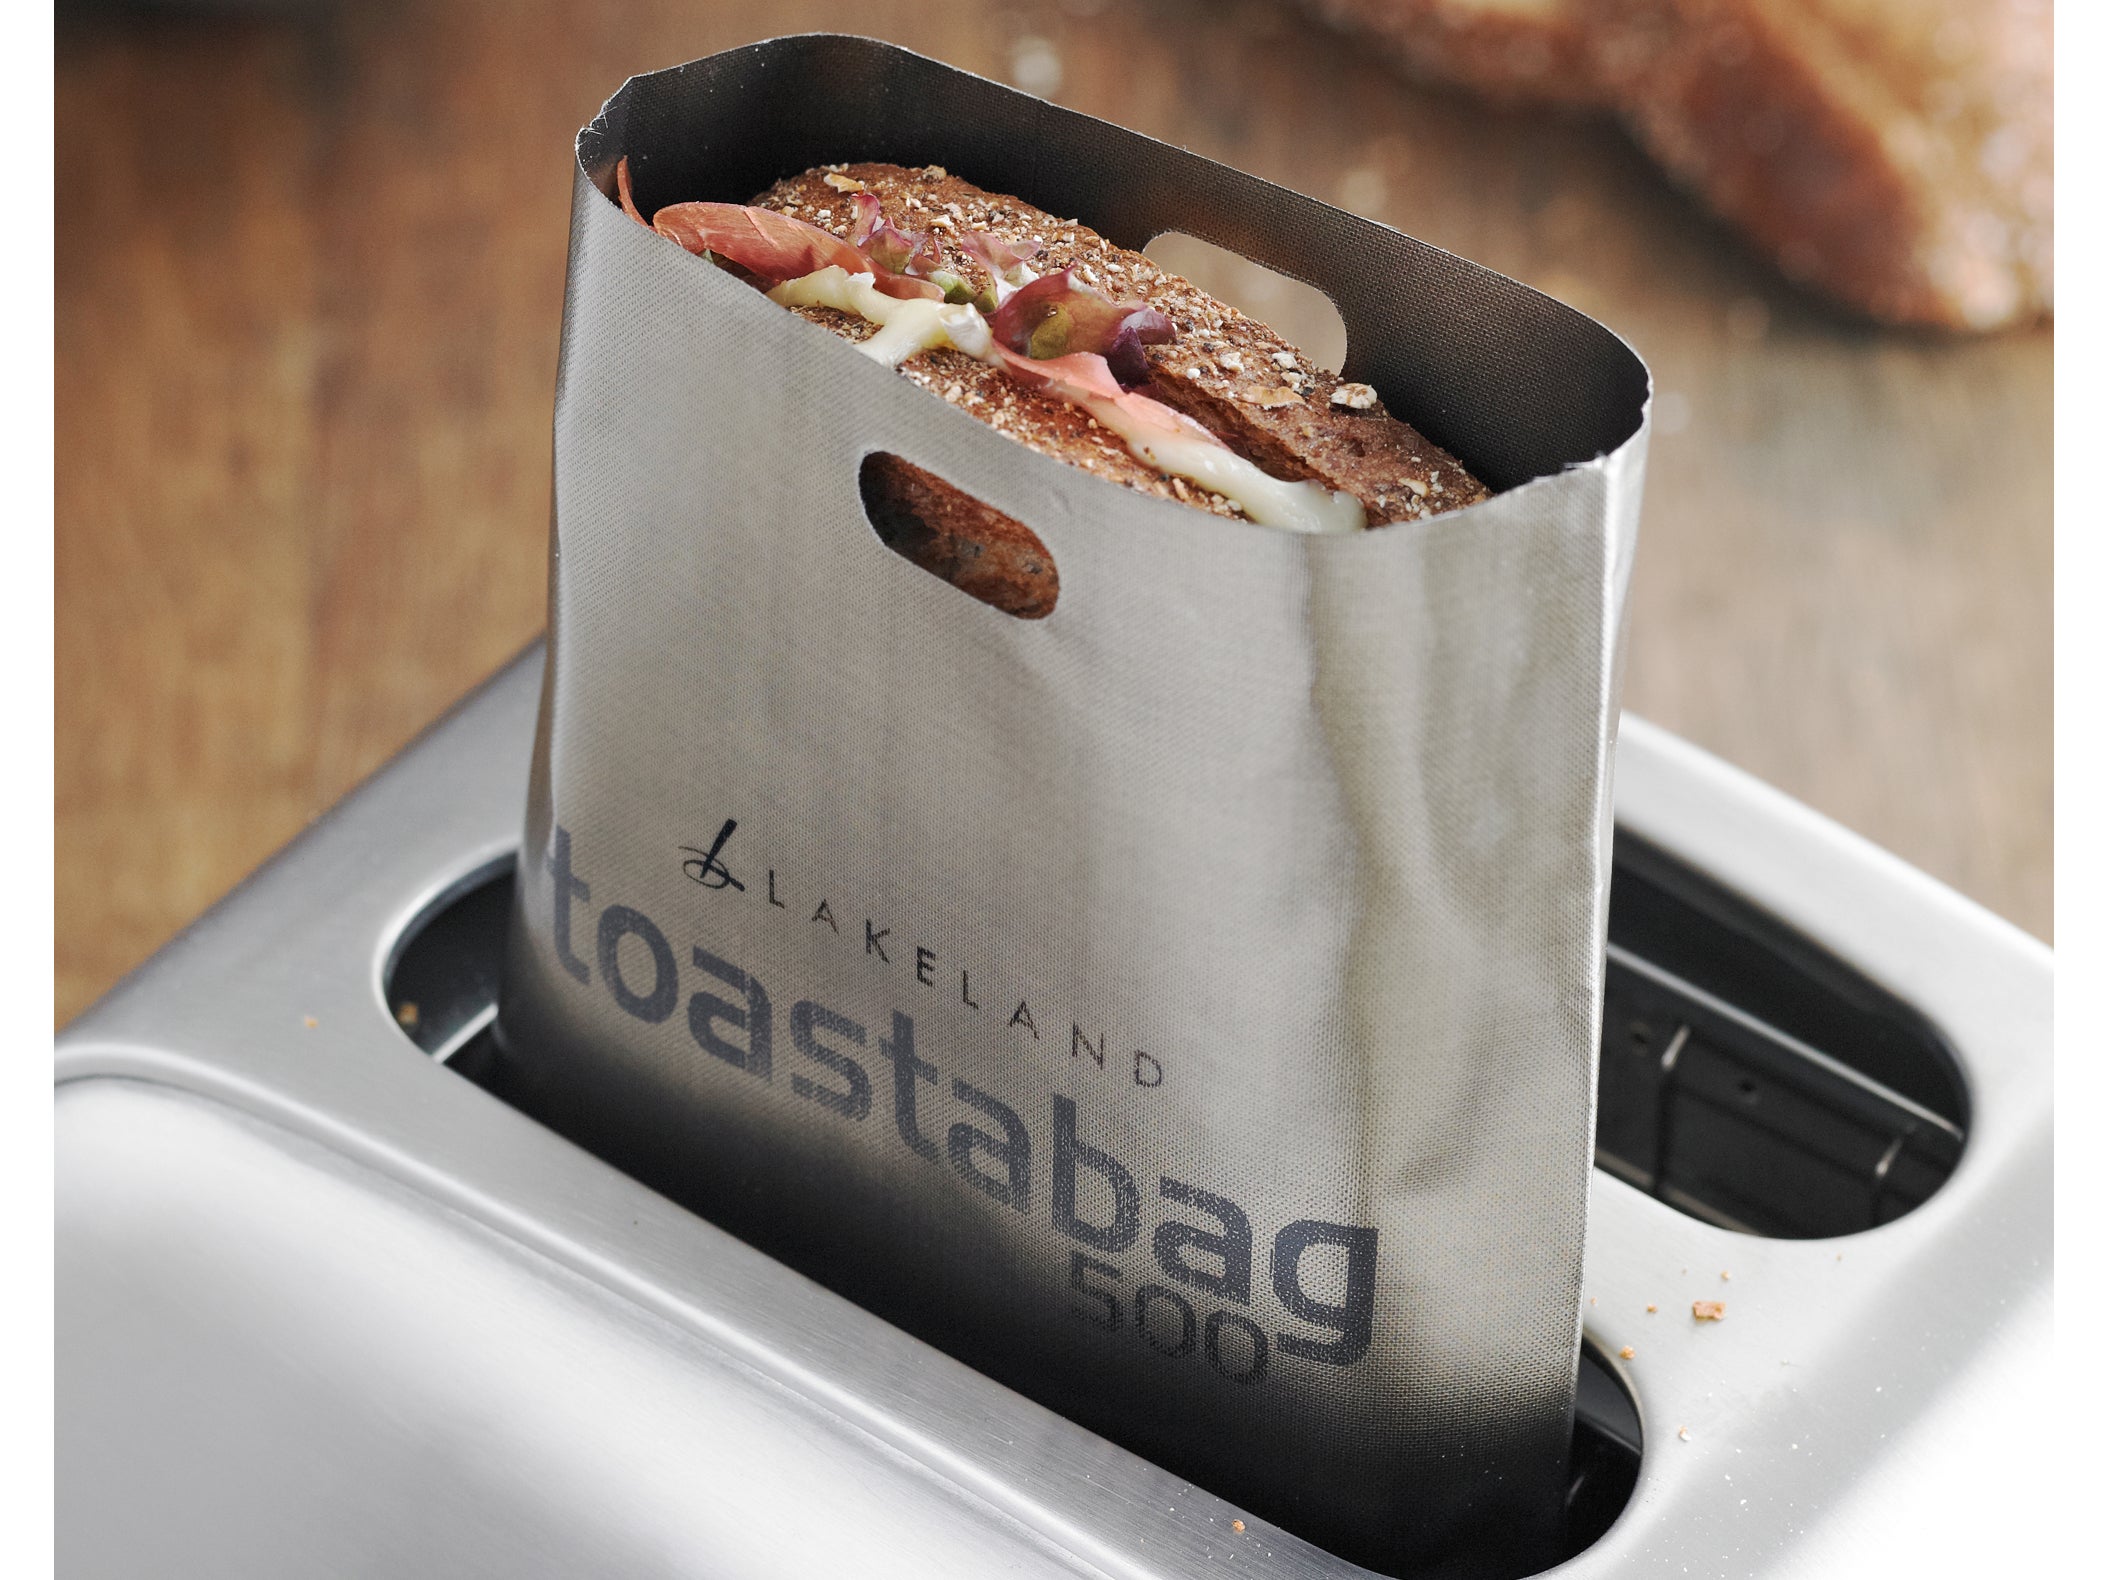 https://static.independent.co.uk/2021/02/04/15/Toastabags%20%281%29.jpg